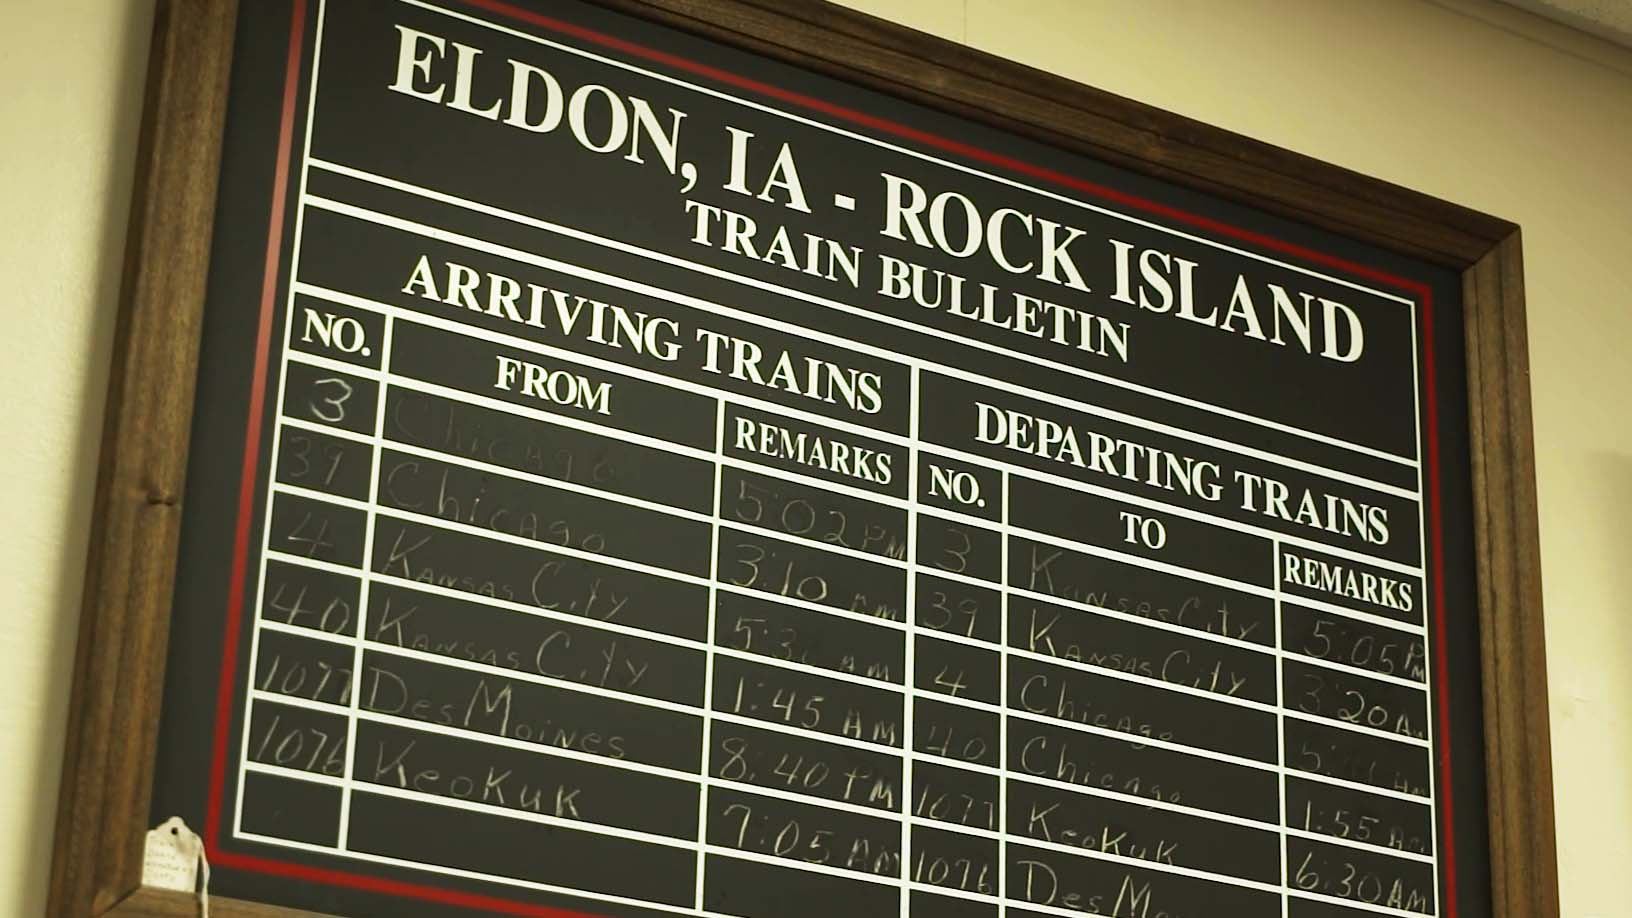 A train bulletin showing the incoming and departing train times.